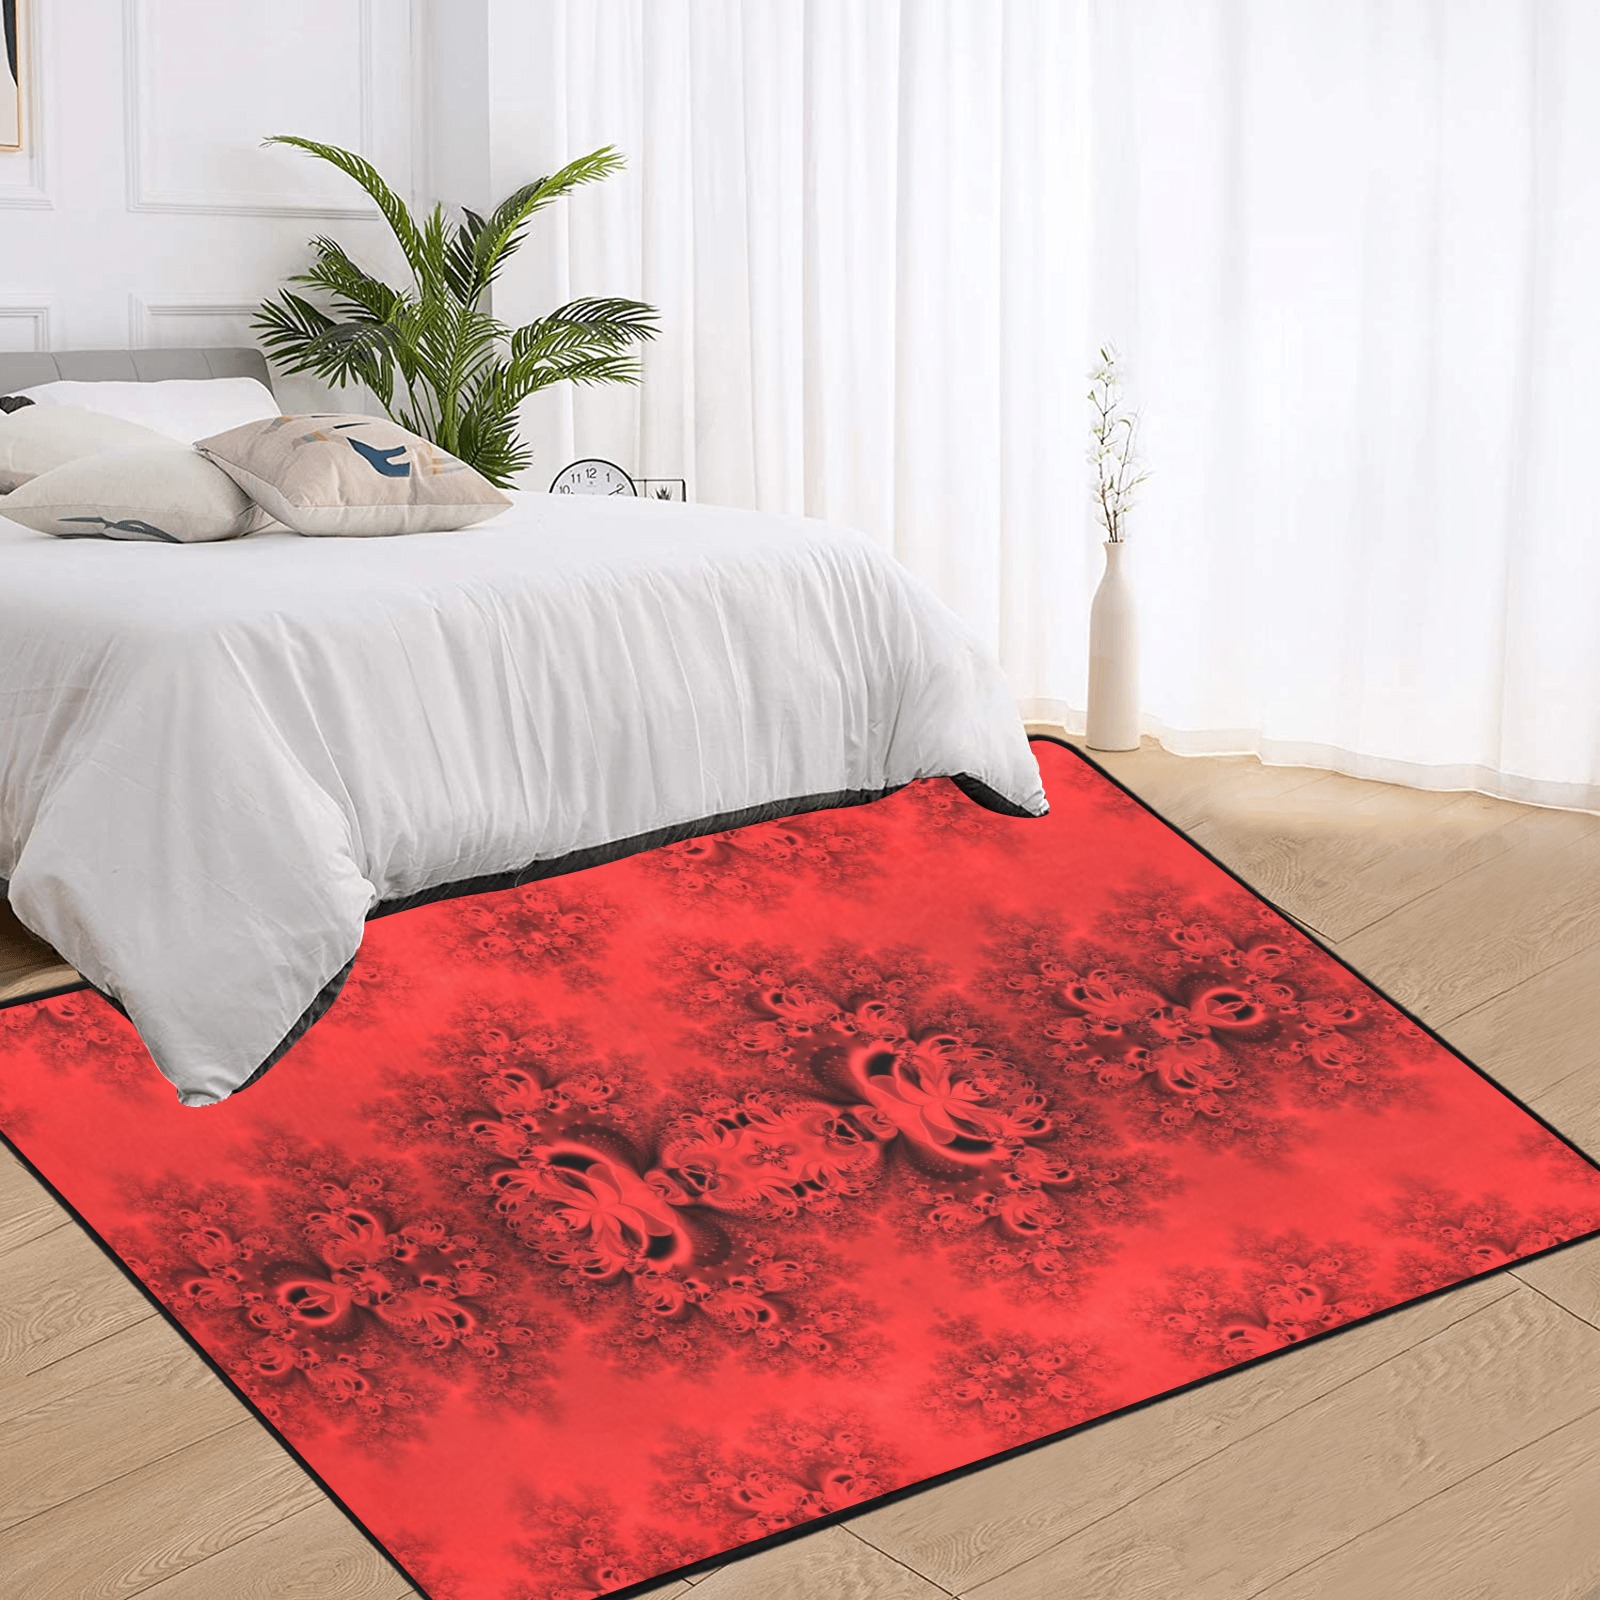 Autumn Reds in the Garden Frost Fractal Area Rug with Black Binding 7'x5'